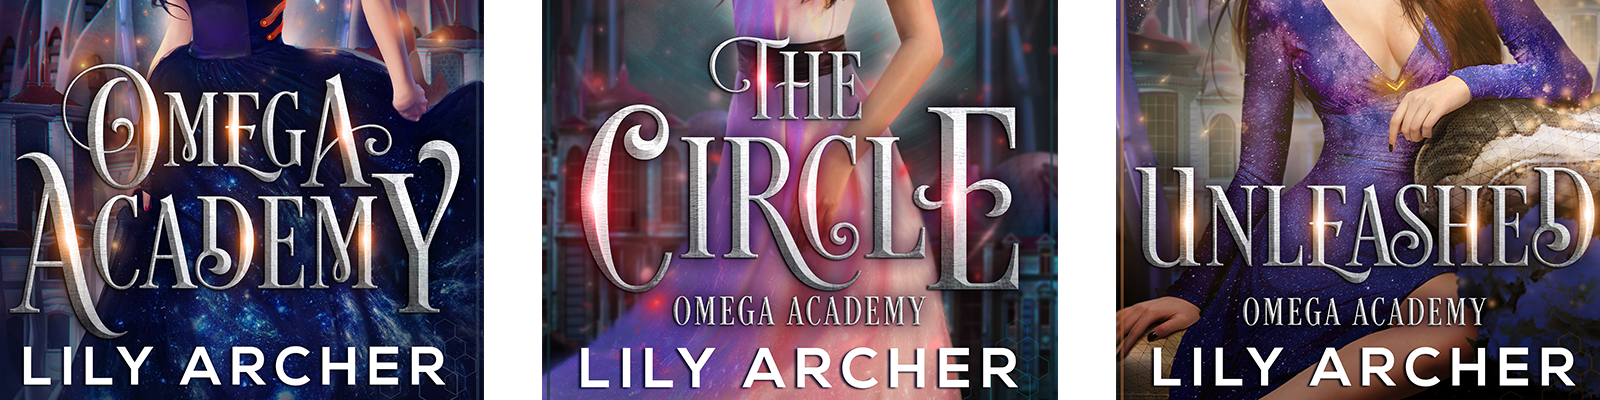 Title design for Omega Academy Series 1-3 by Lily Archer